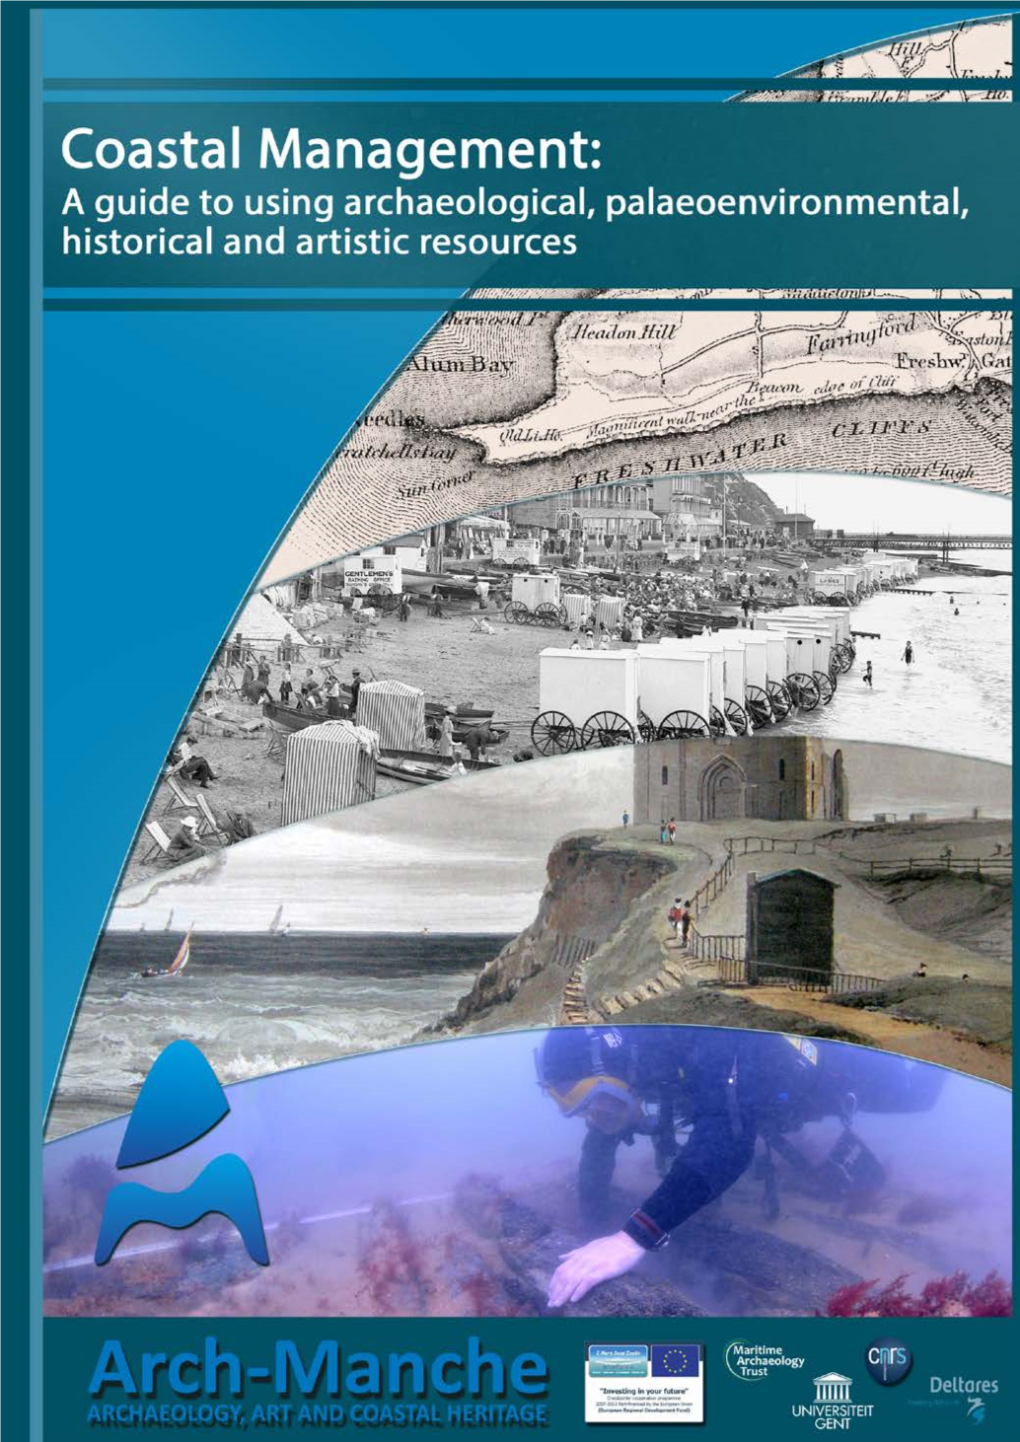 Guide to Using Archaeological, Palaeoenvironmental, Historical and Artistic Resources